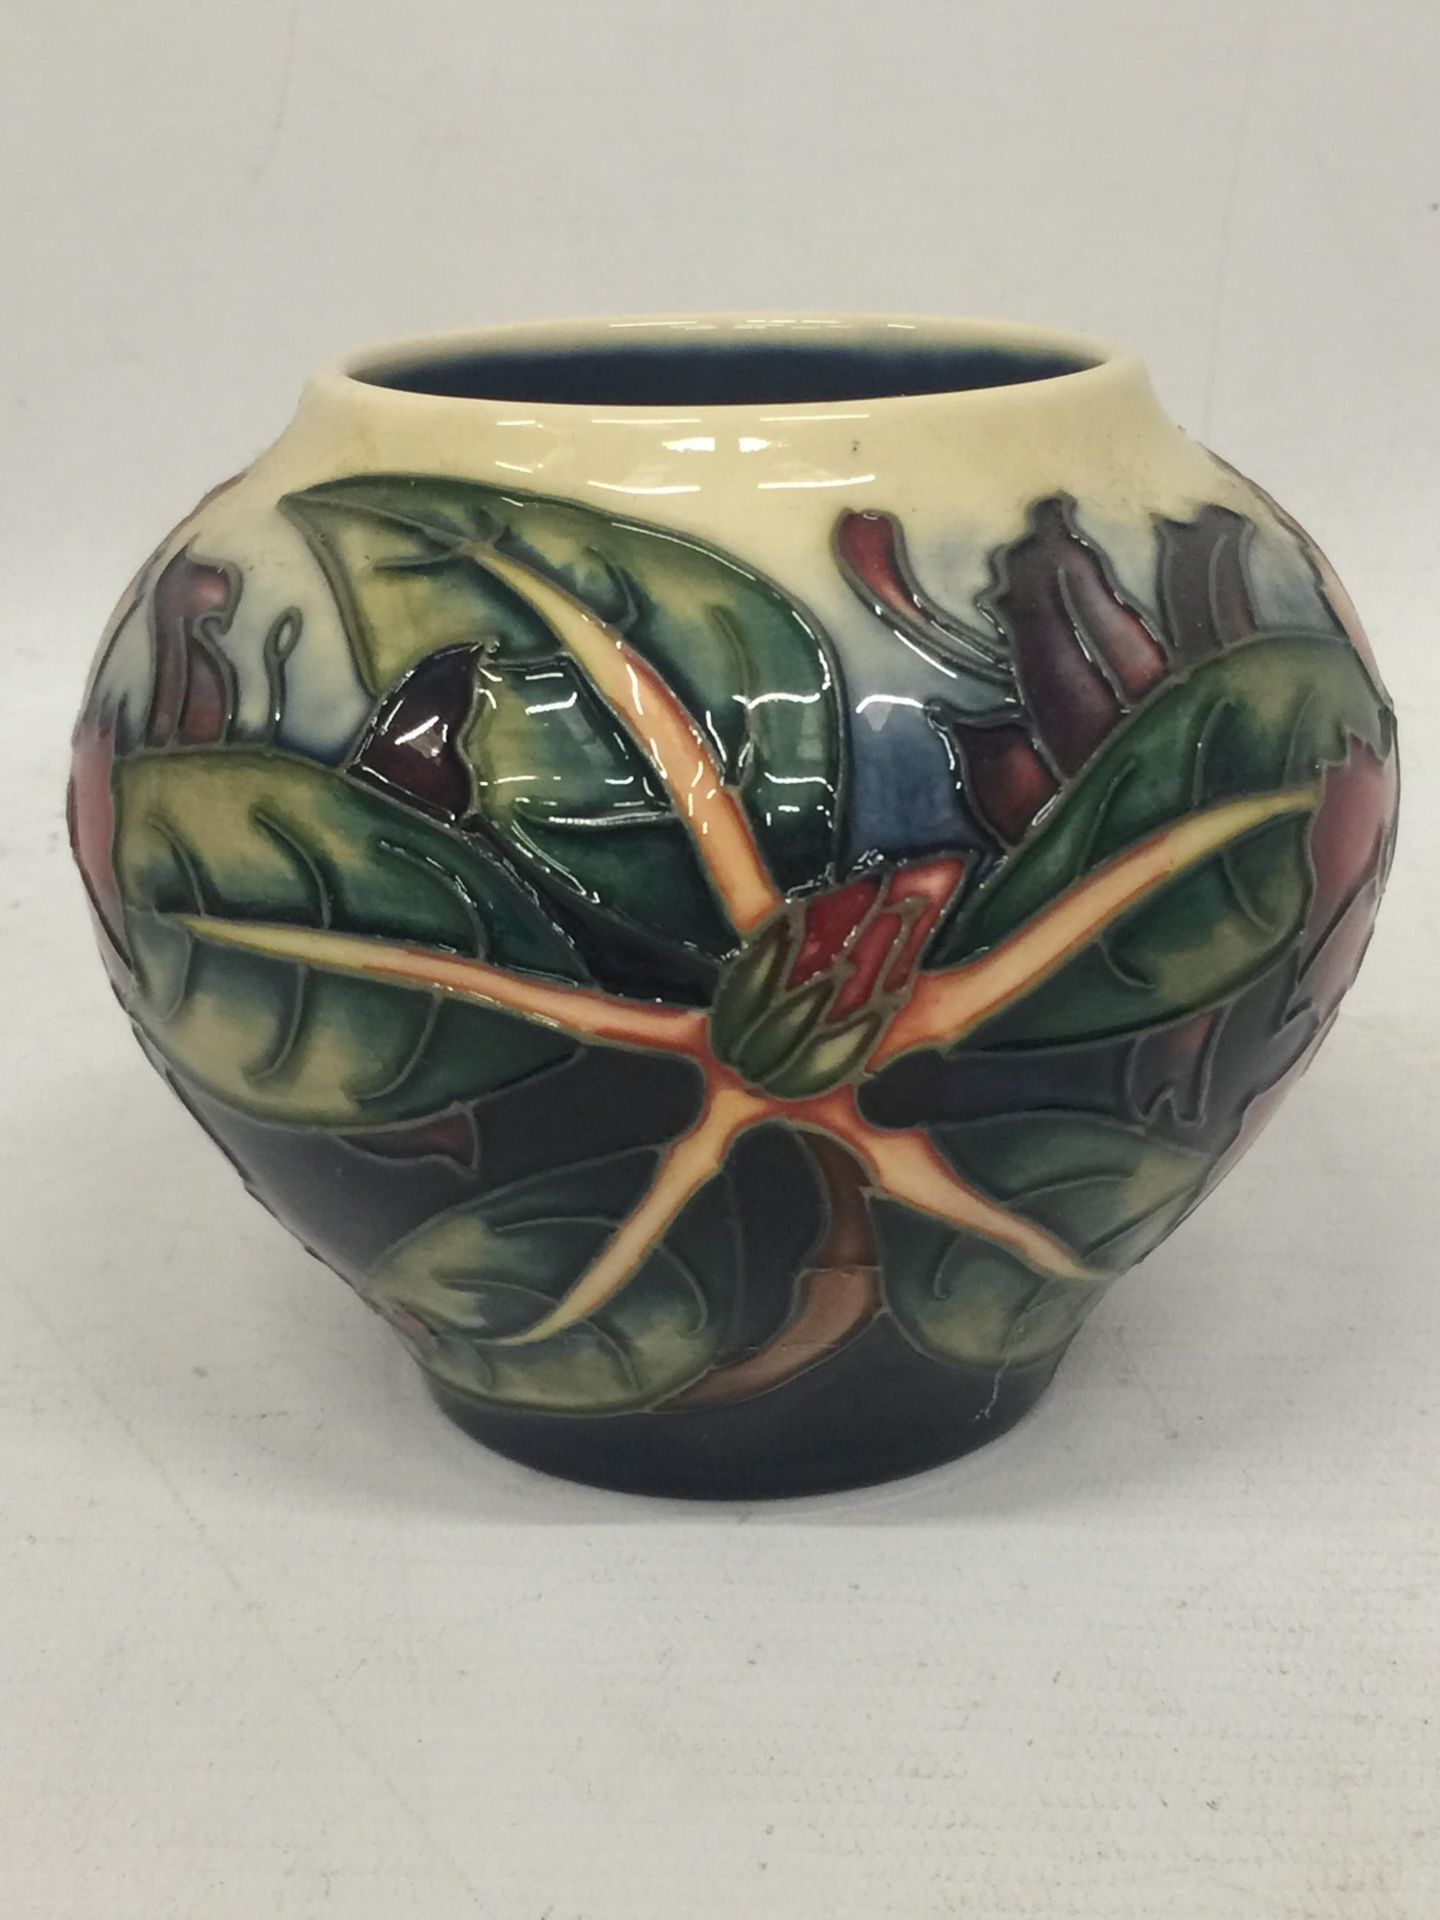 A MOORCROFT 'SIMEON' PATTERN VASE BY PHILIP GIBSON, SECONDS - Image 3 of 5